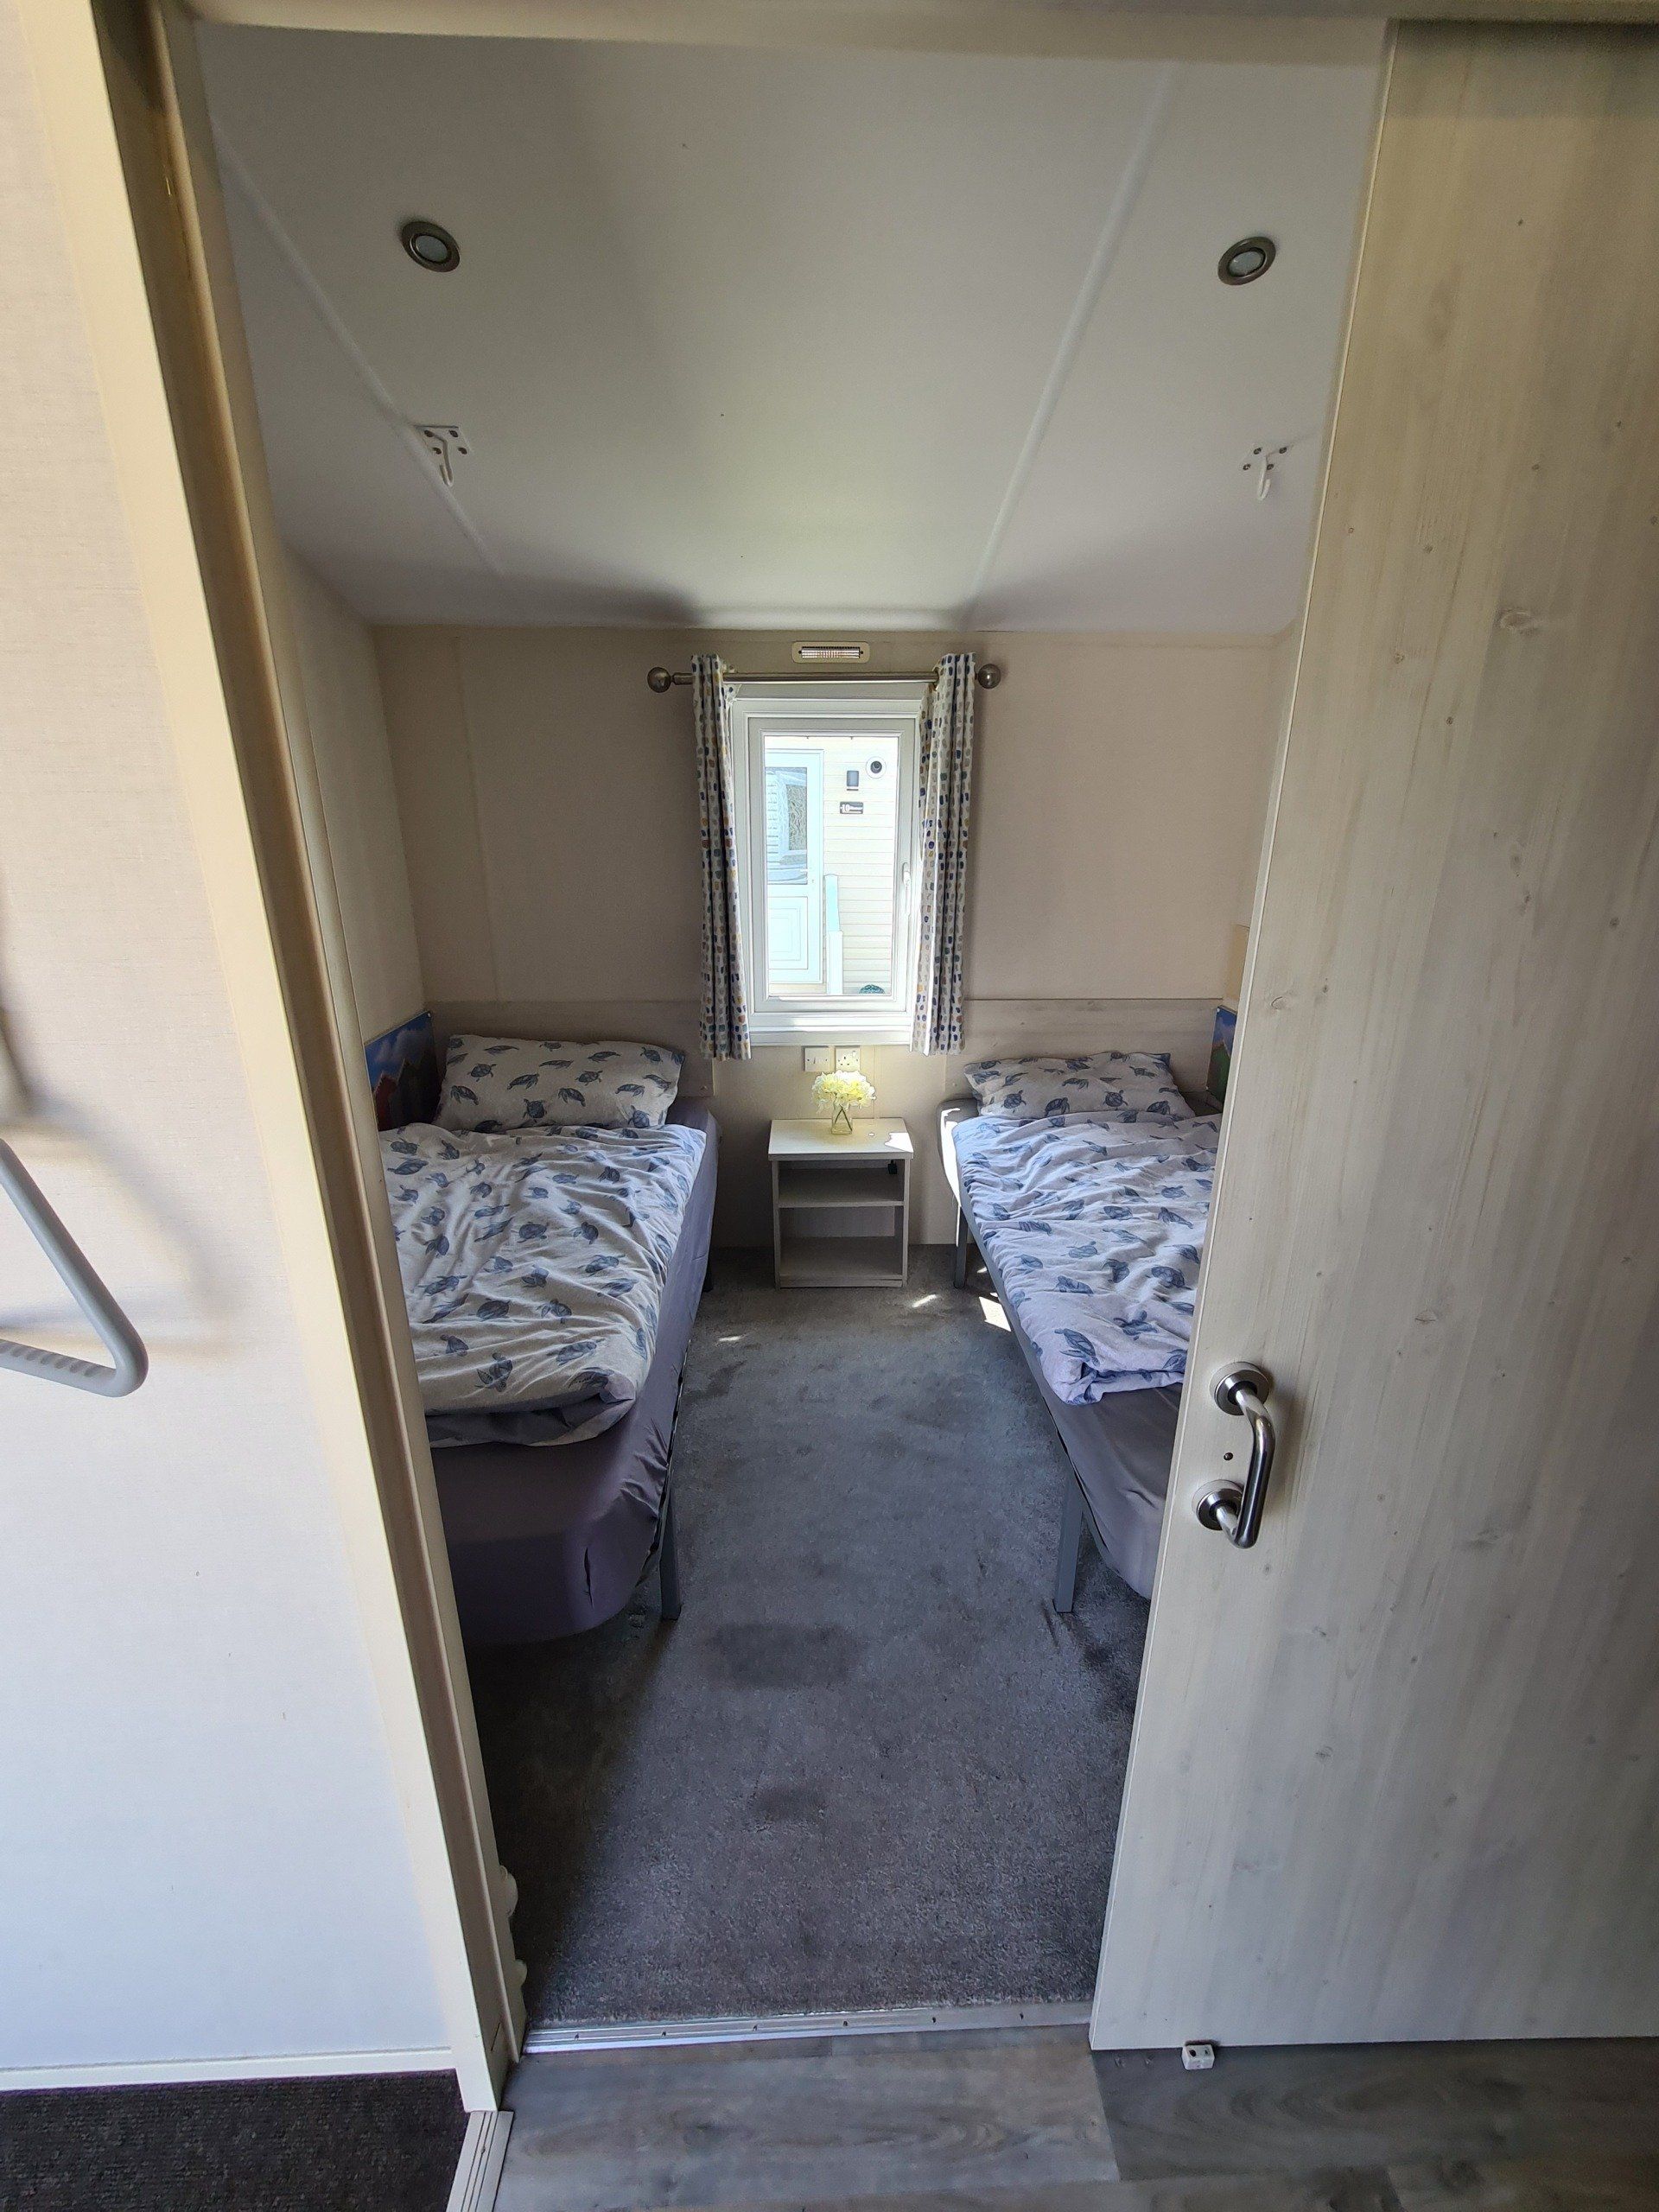 a view inside the second bedroom of the sign along with us foundation caravan showing two single beds seperated by a bed side cabinet with overhead hooks for manual grab handles